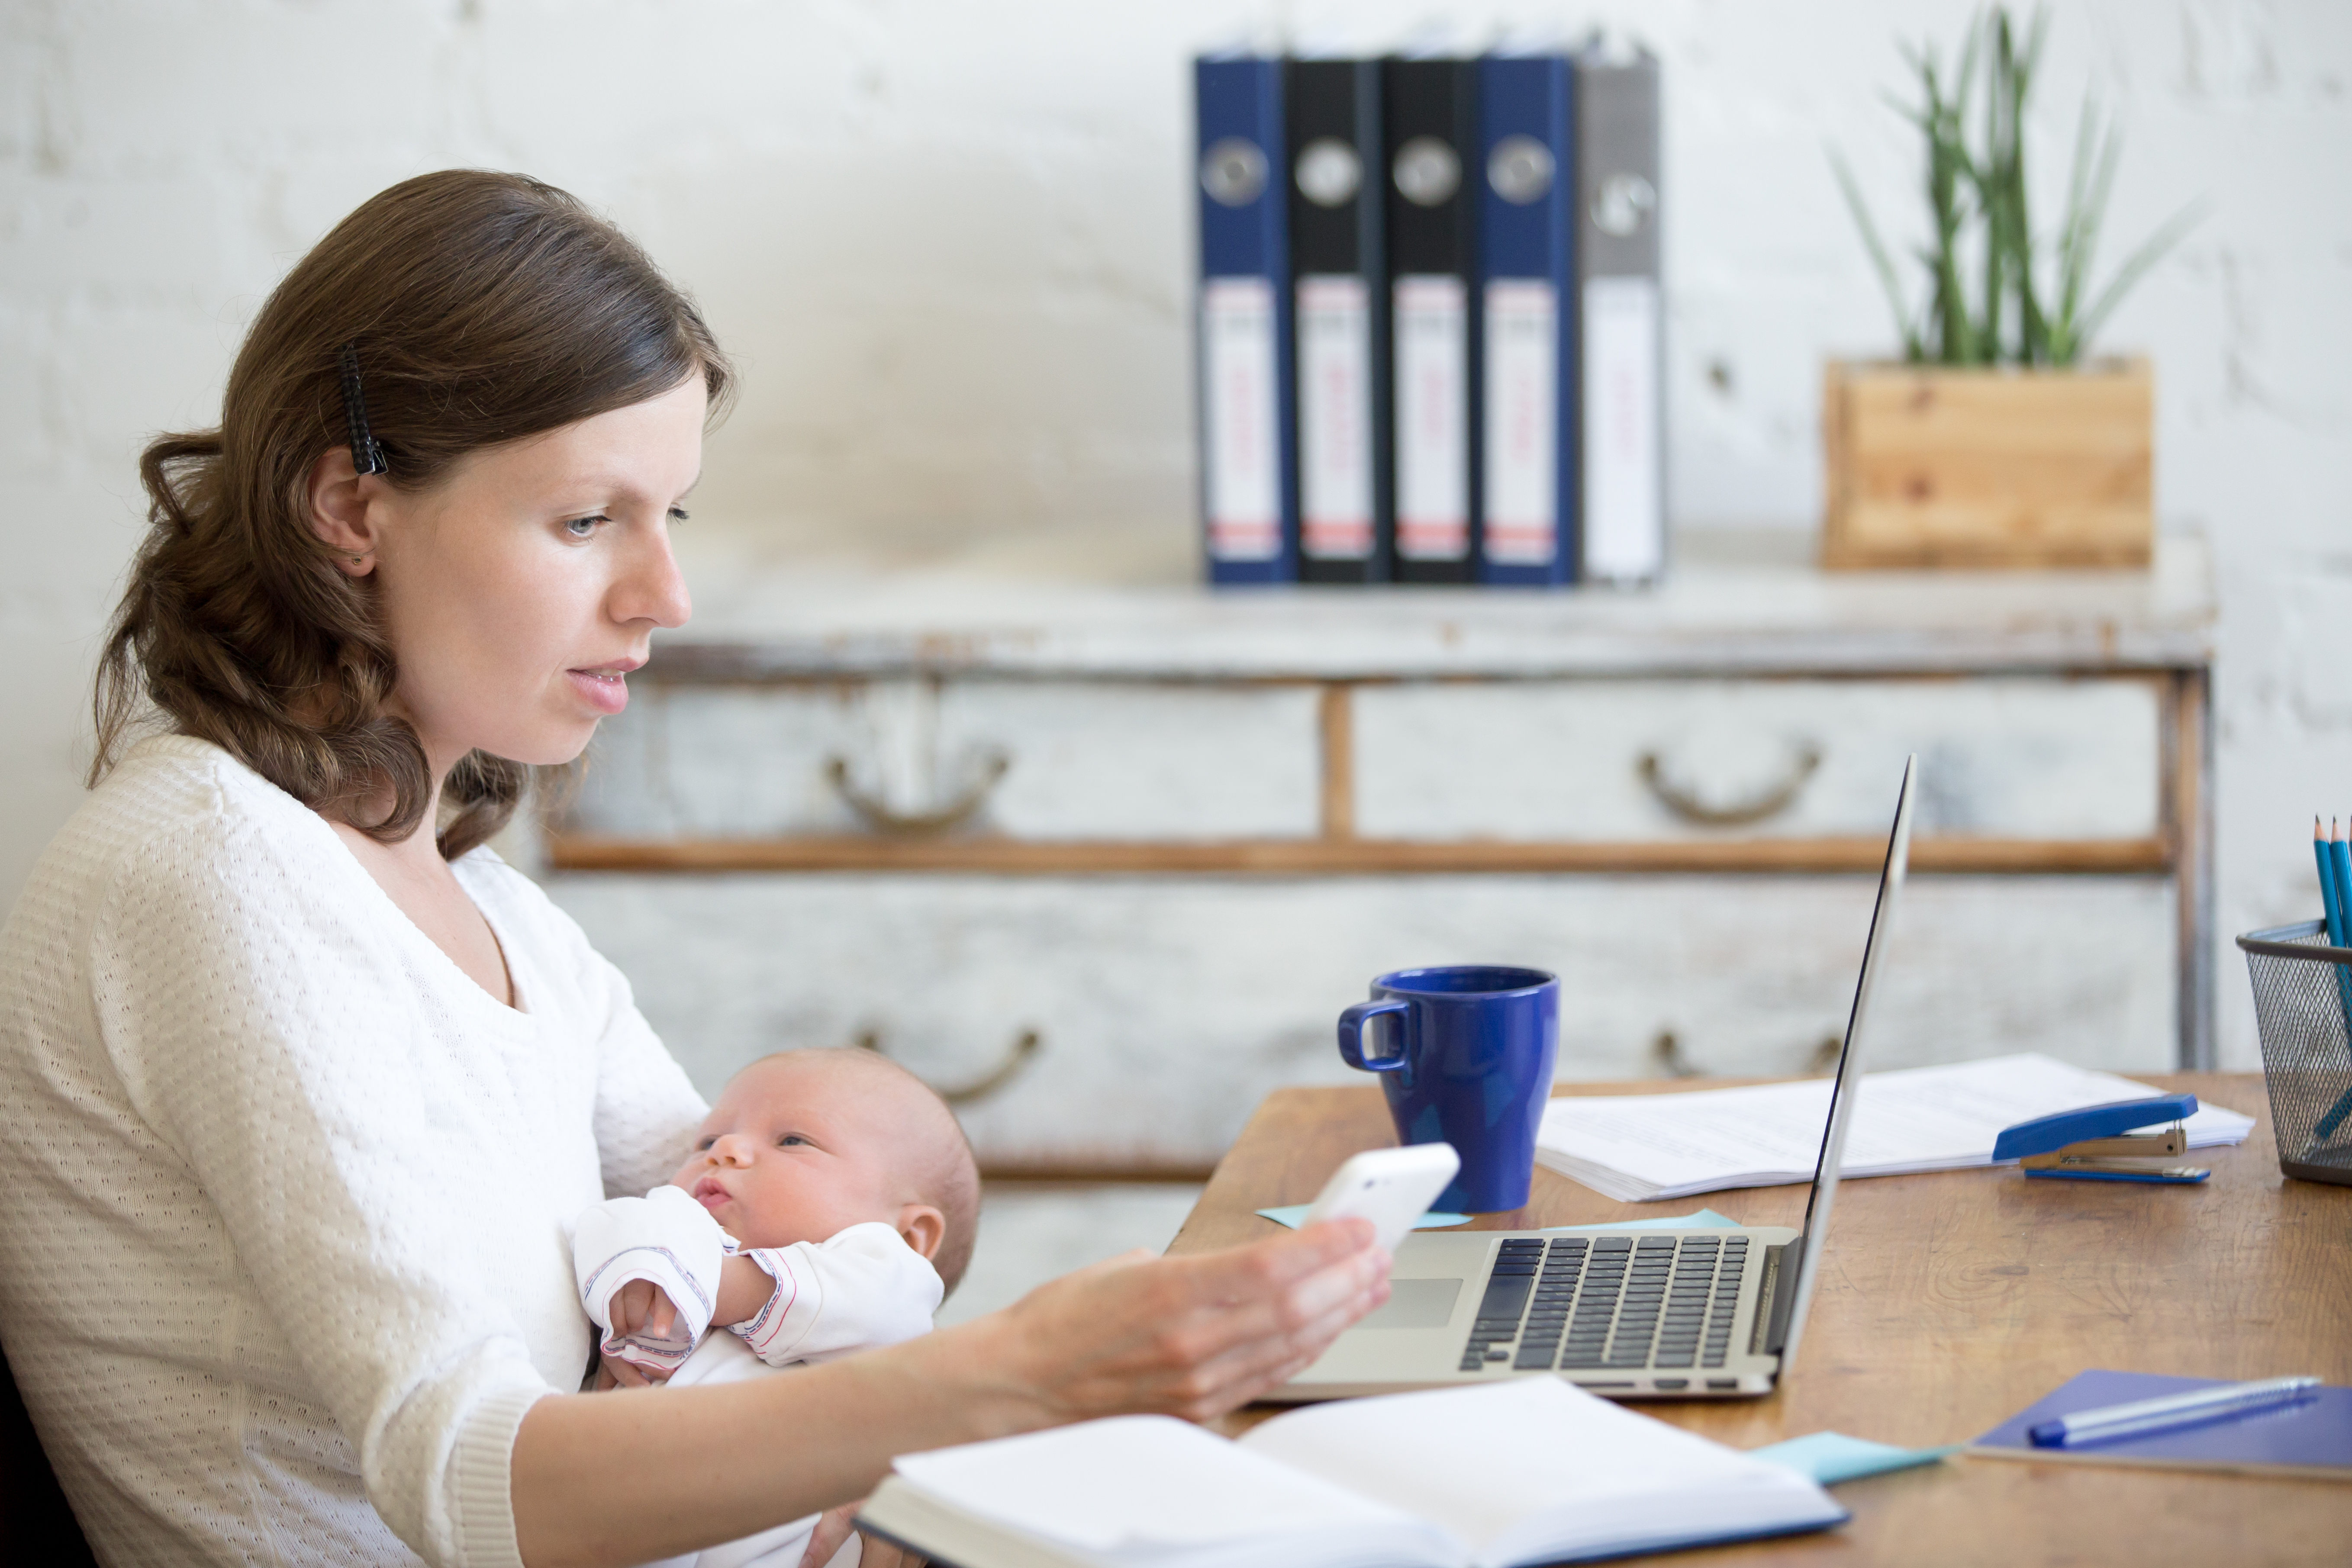 mom working at a desk holding a baby